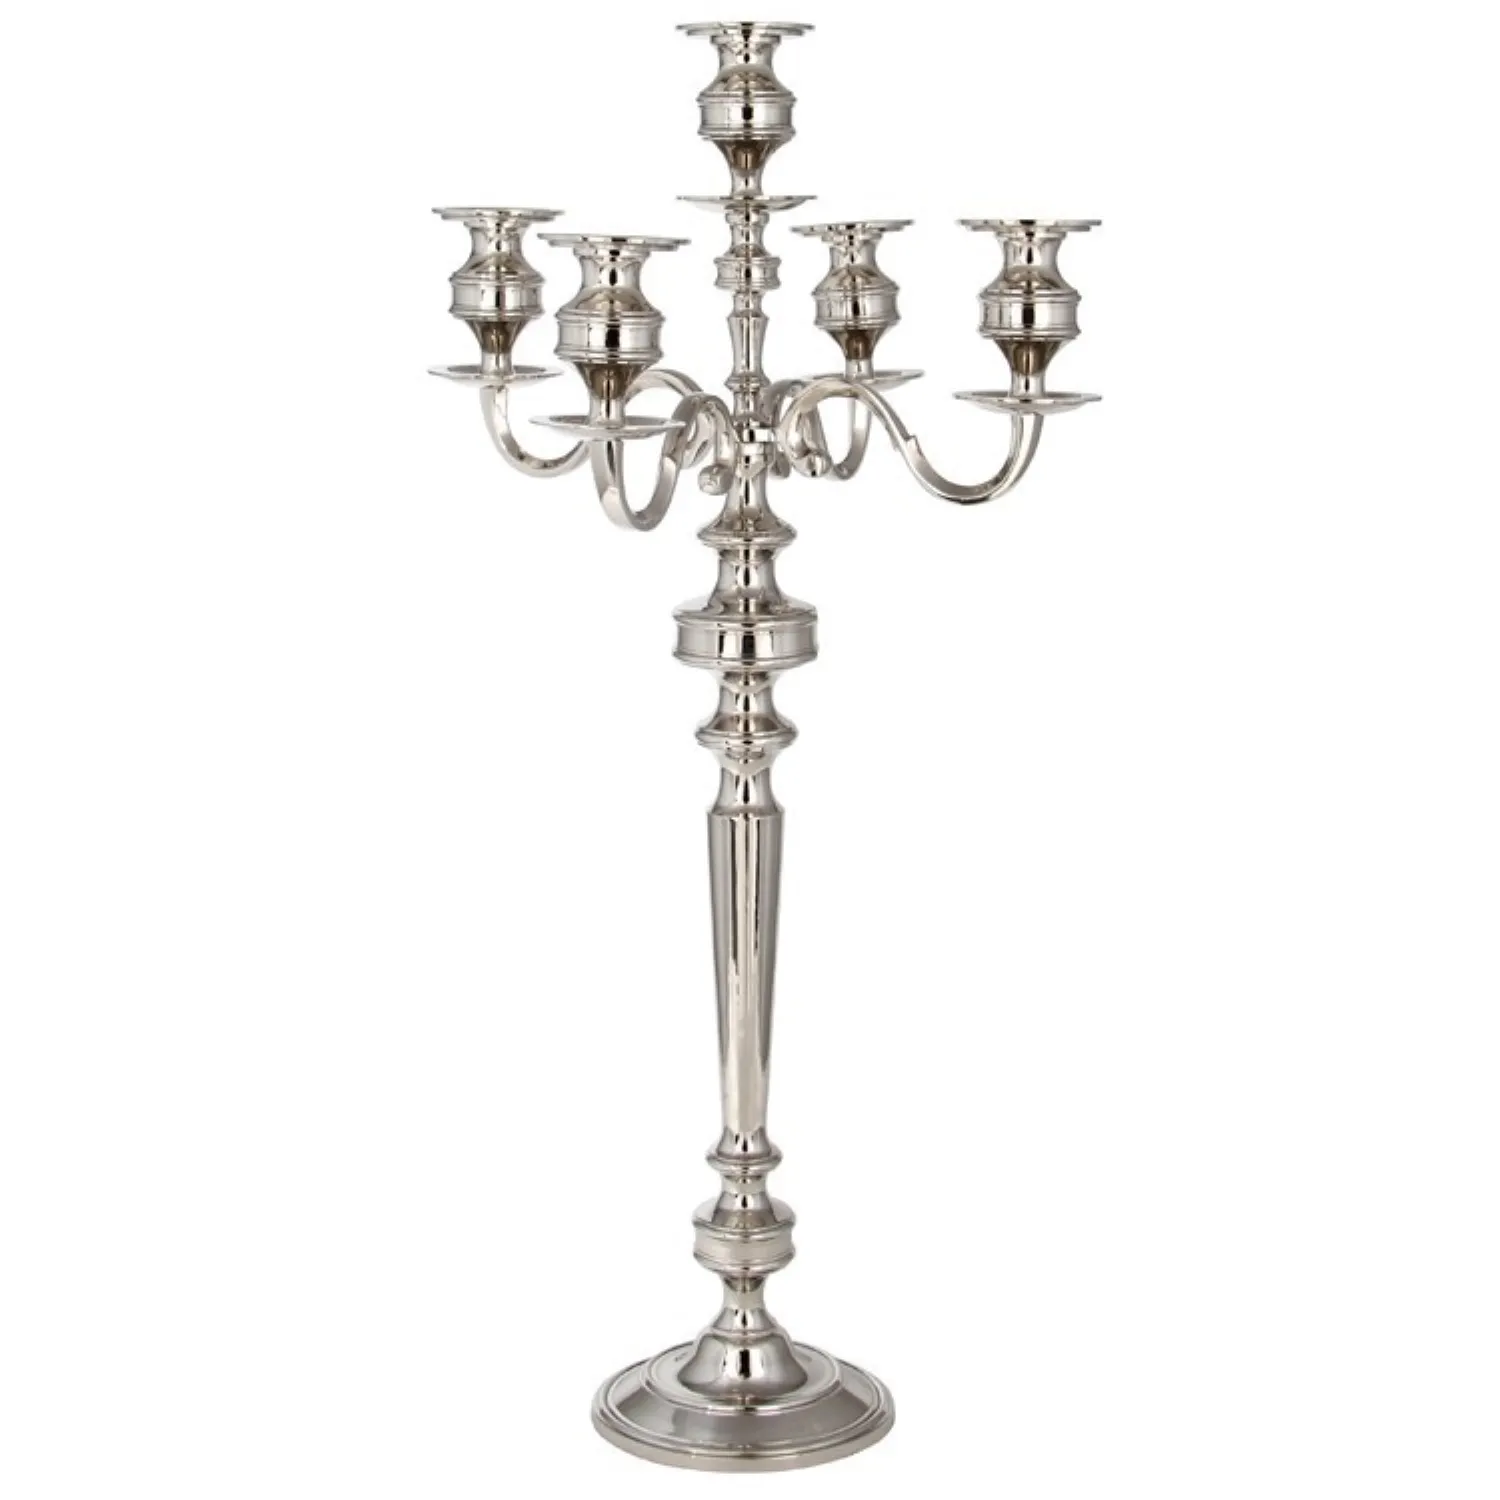 Silver Metal Floor Standing Candelabra with 5 Candle Holders